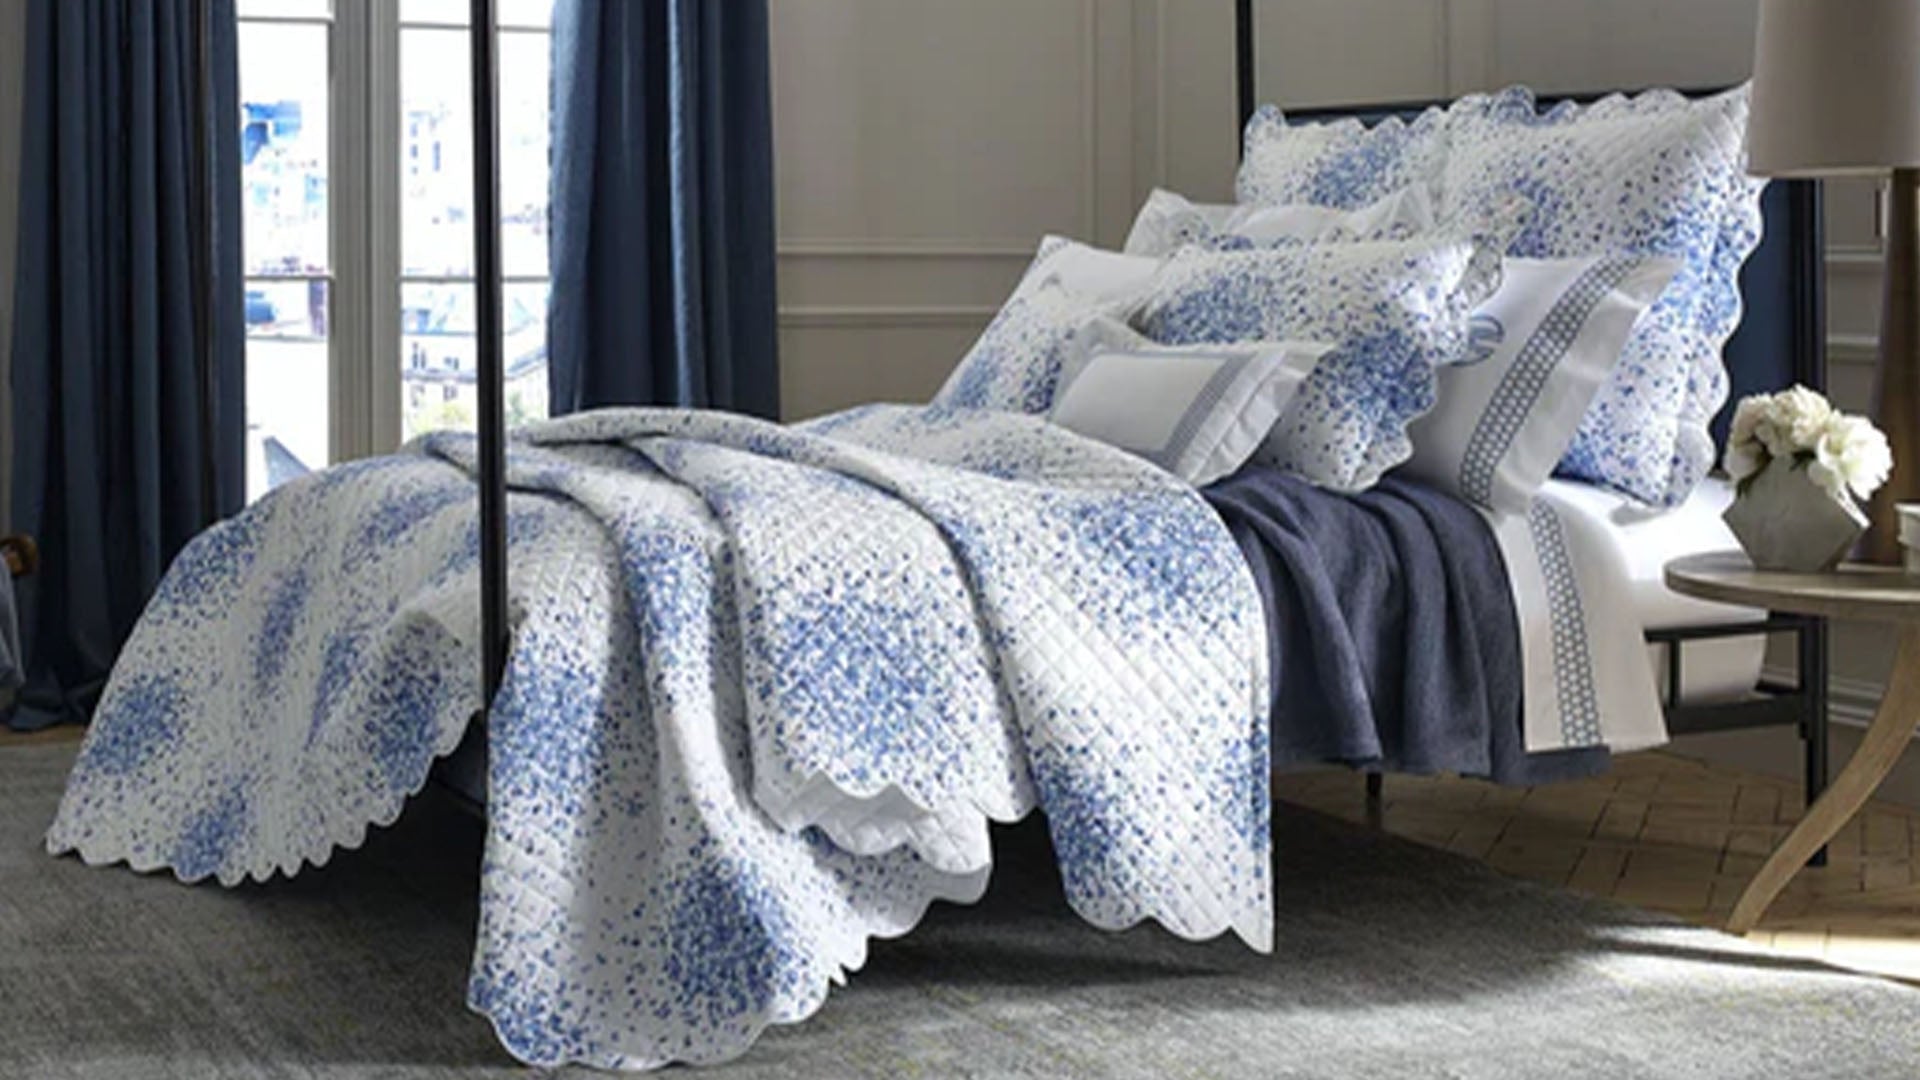 Expensive Bedding: Is it Really Worth It? Floral Fine Linens Bedding in Bedroom